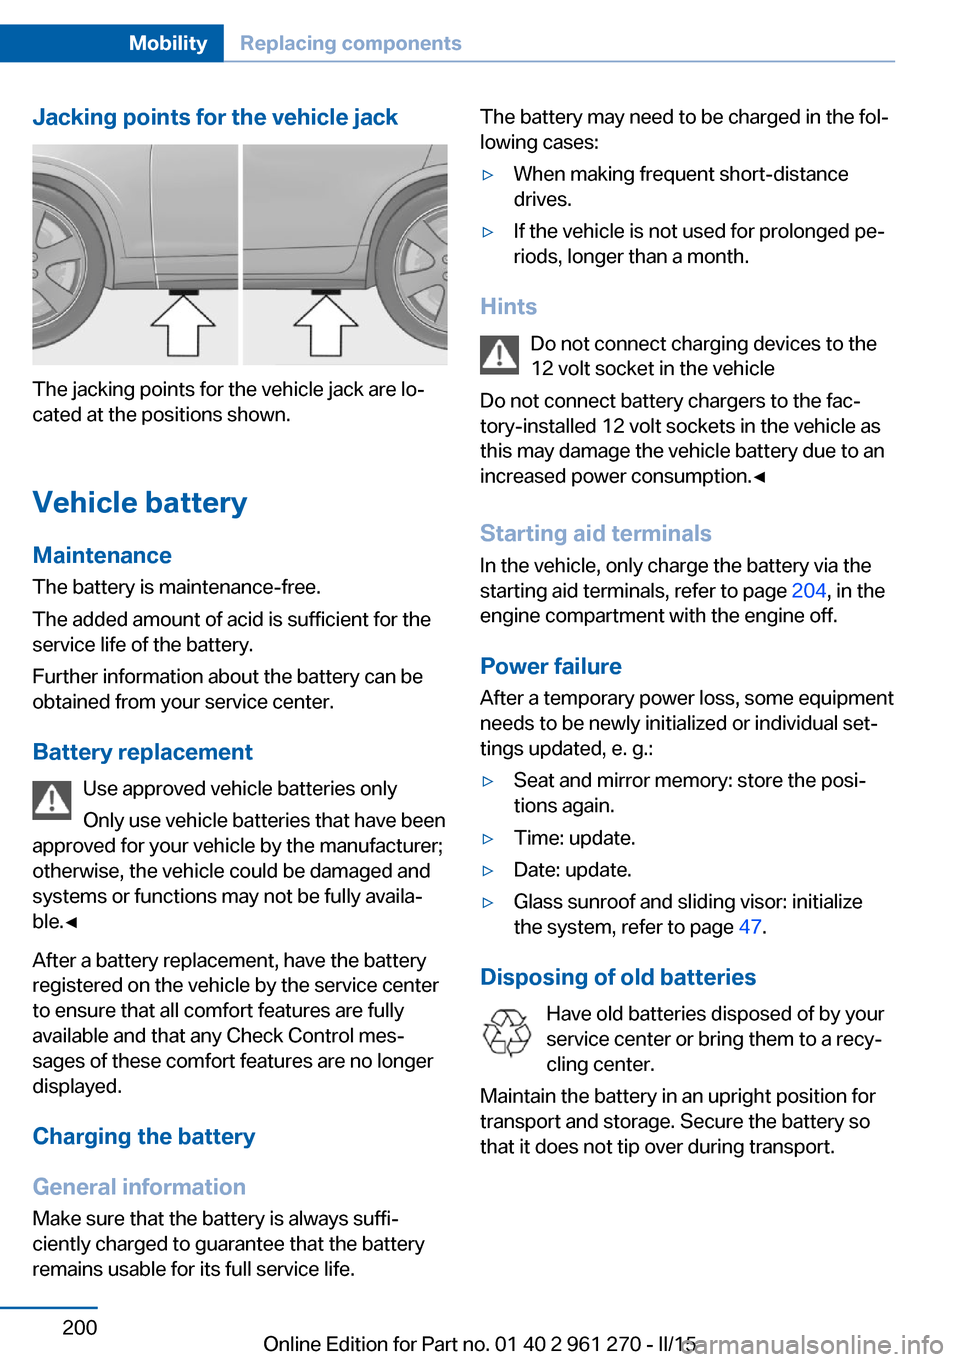 BMW 2 SERIES COUPE 2015 F22 Owners Guide Jacking points for the vehicle jack
The jacking points for the vehicle jack are lo‐
cated at the positions shown.
Vehicle battery Maintenance
The battery is maintenance-free.
The added amount of aci